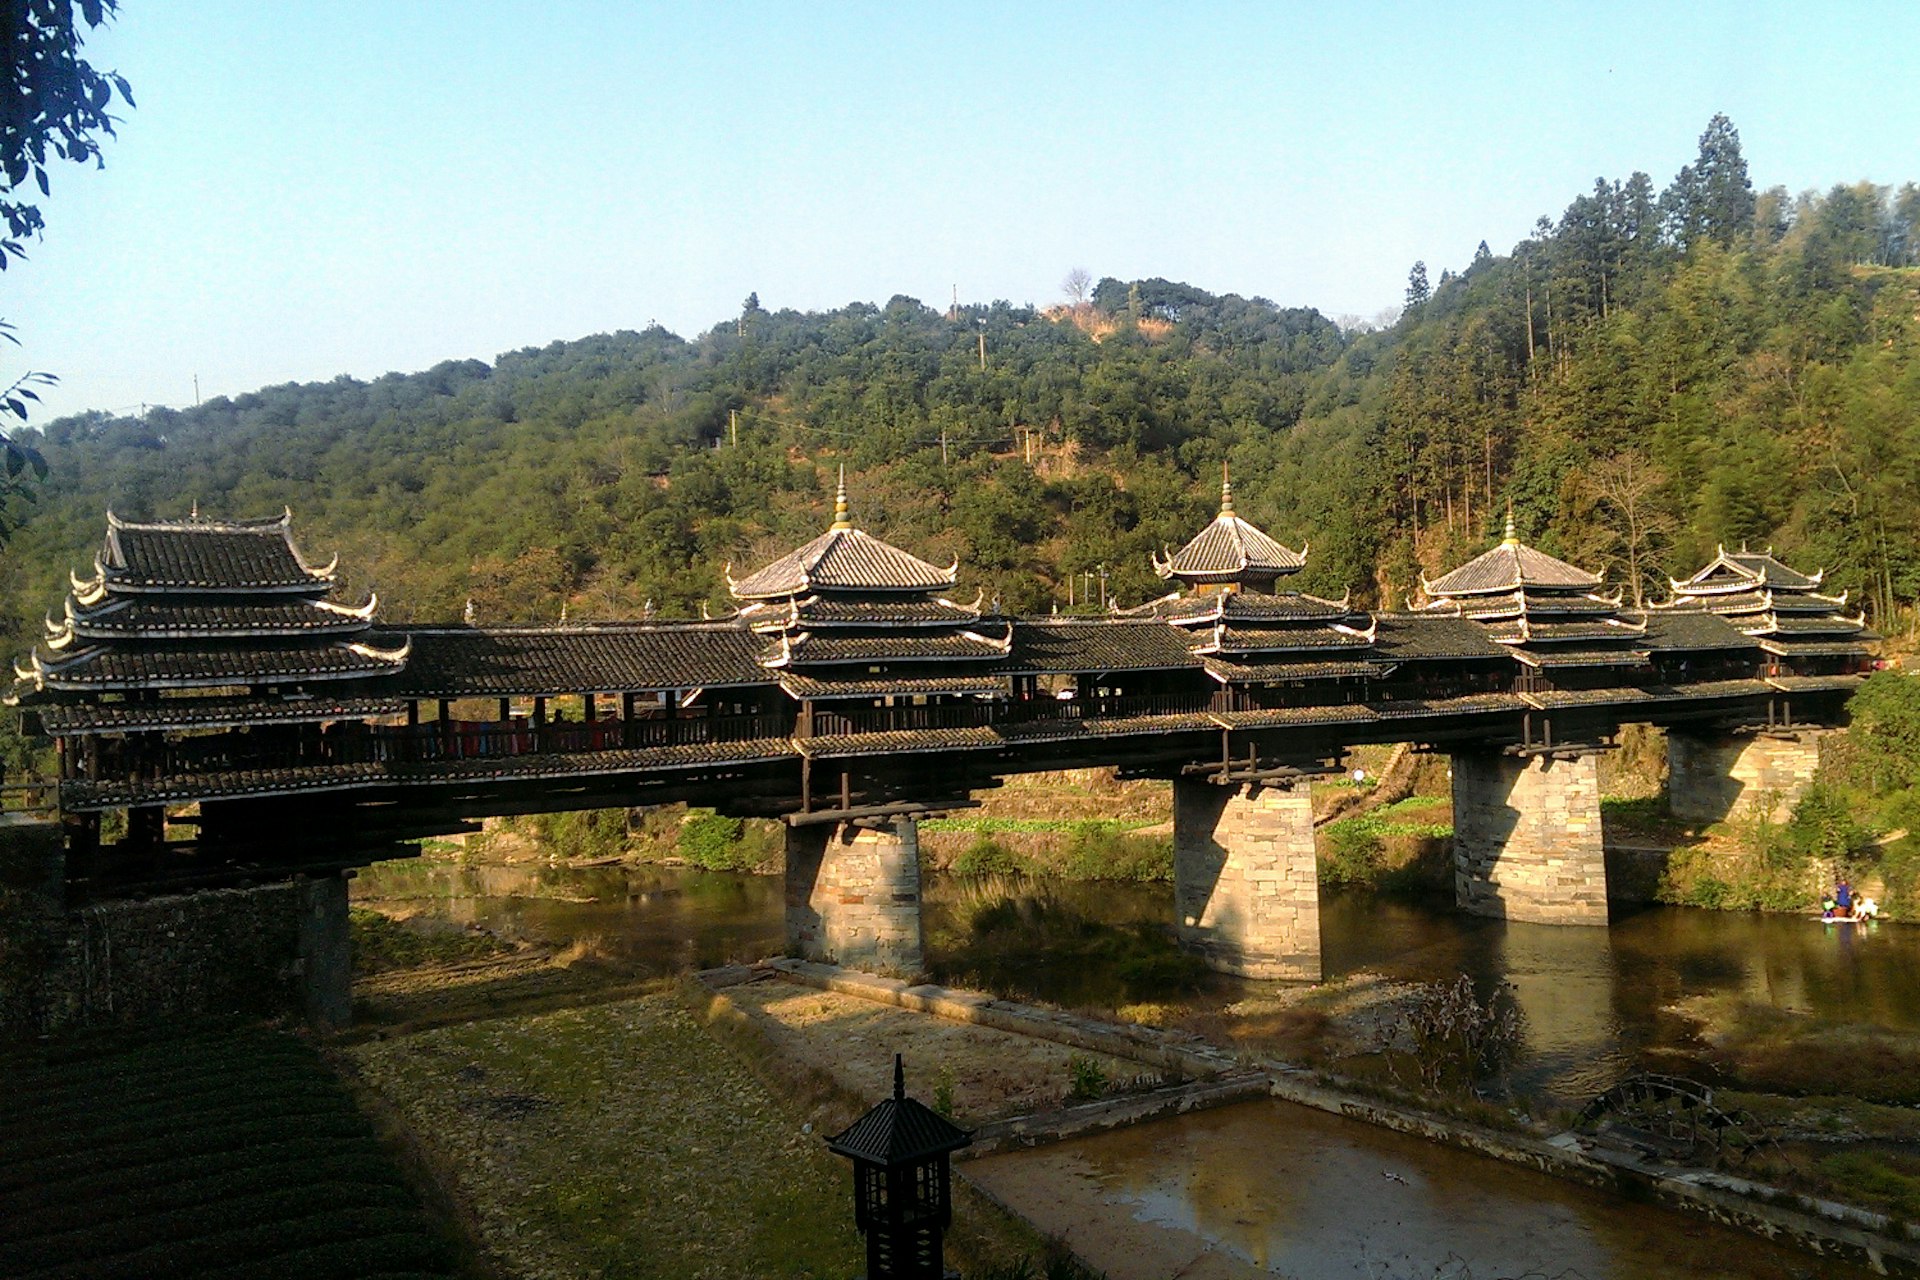 The magnificent Wind and Rain Bridge connects the Dong villages to the outside world. Image by Piera Chen / Lonely Planet